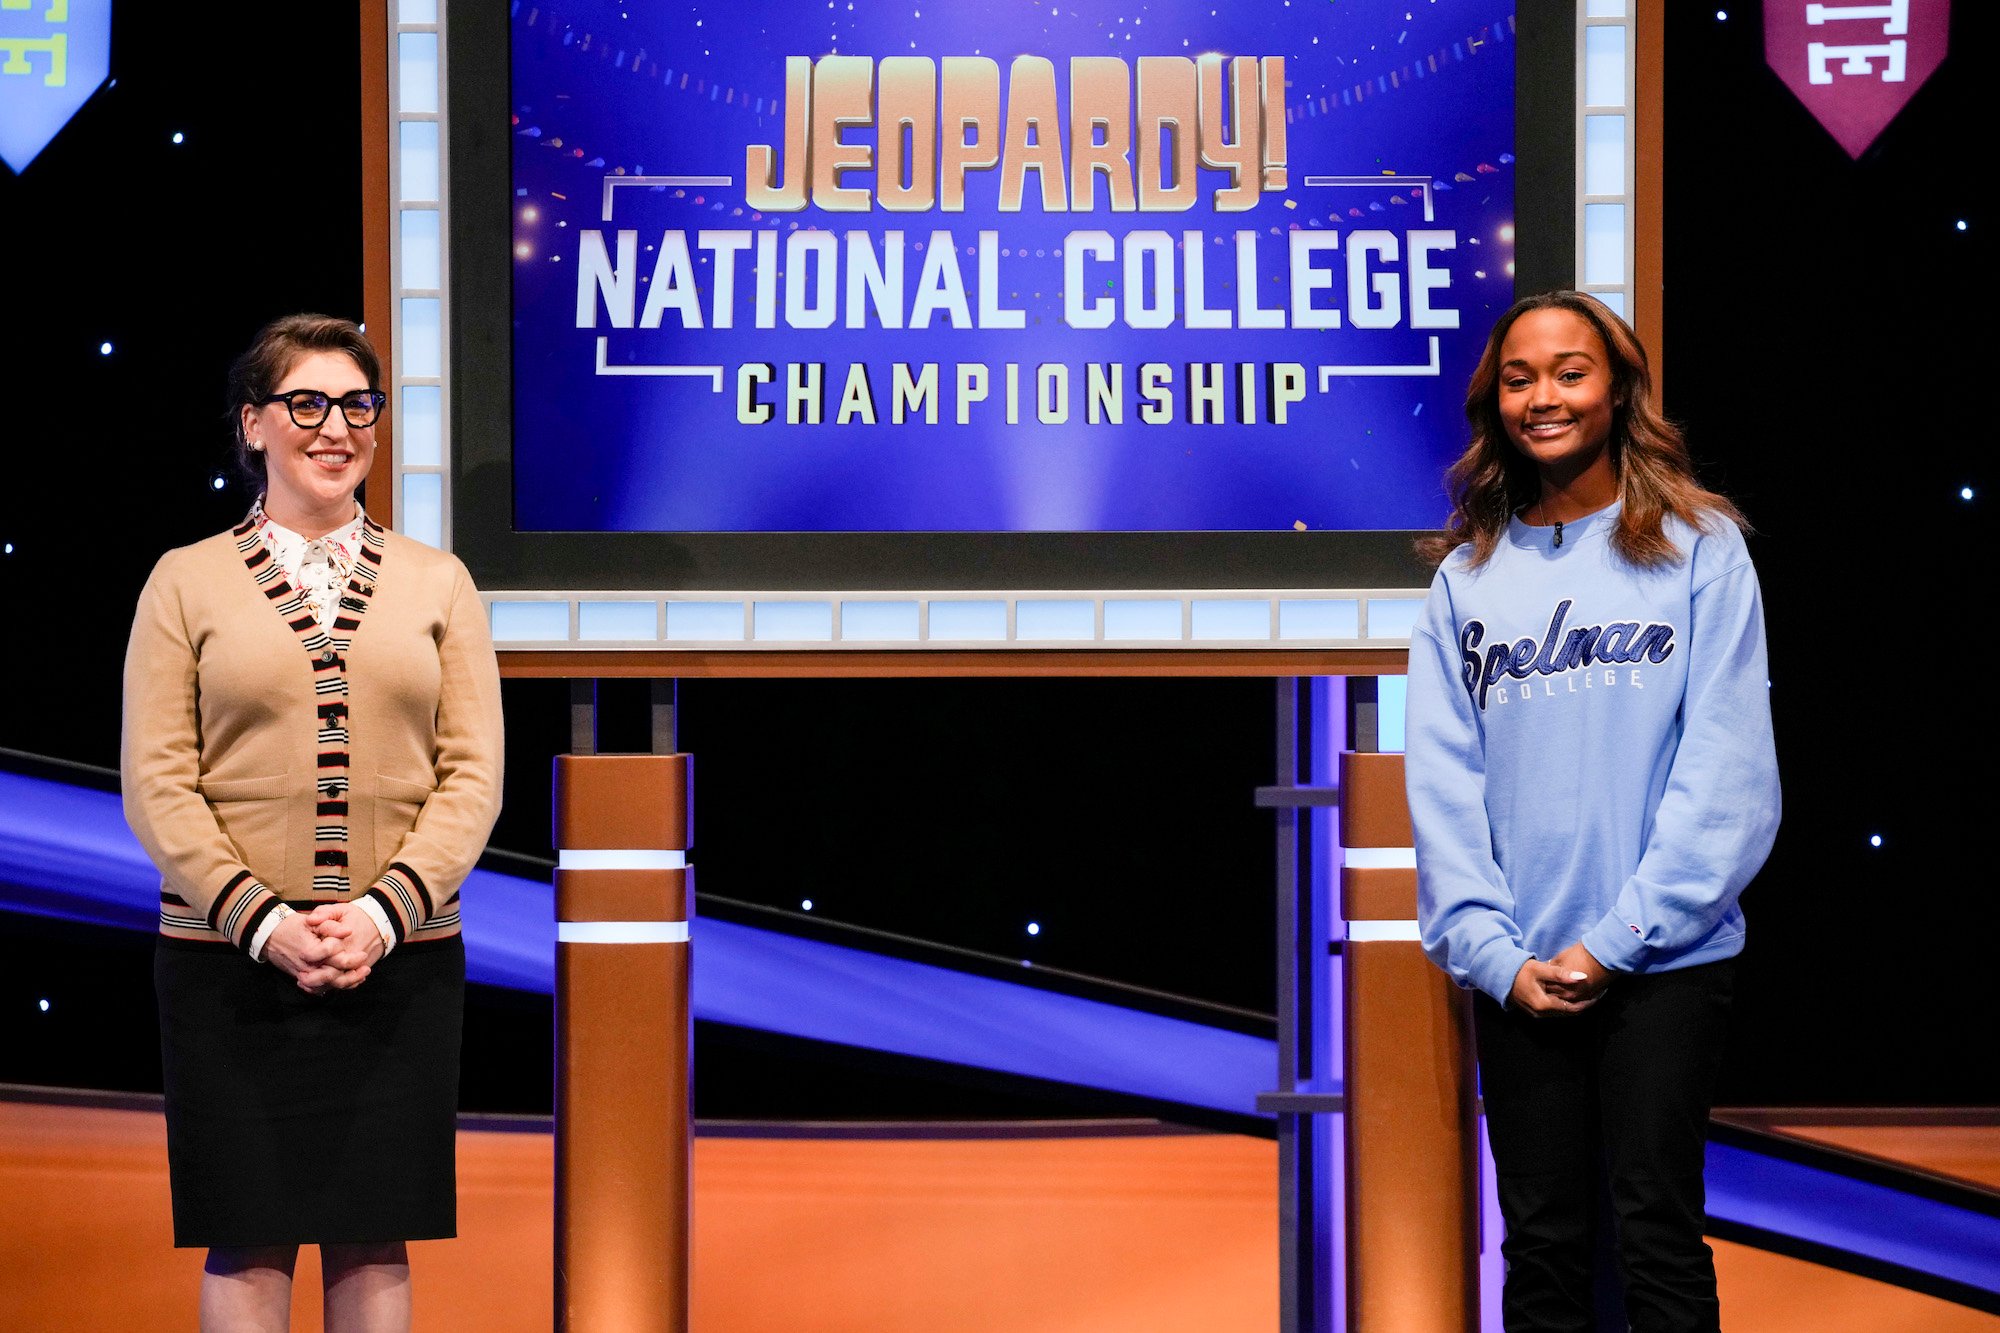 'Jeopardy! National College Championship' host Mayim Bialik stands with a college contestant